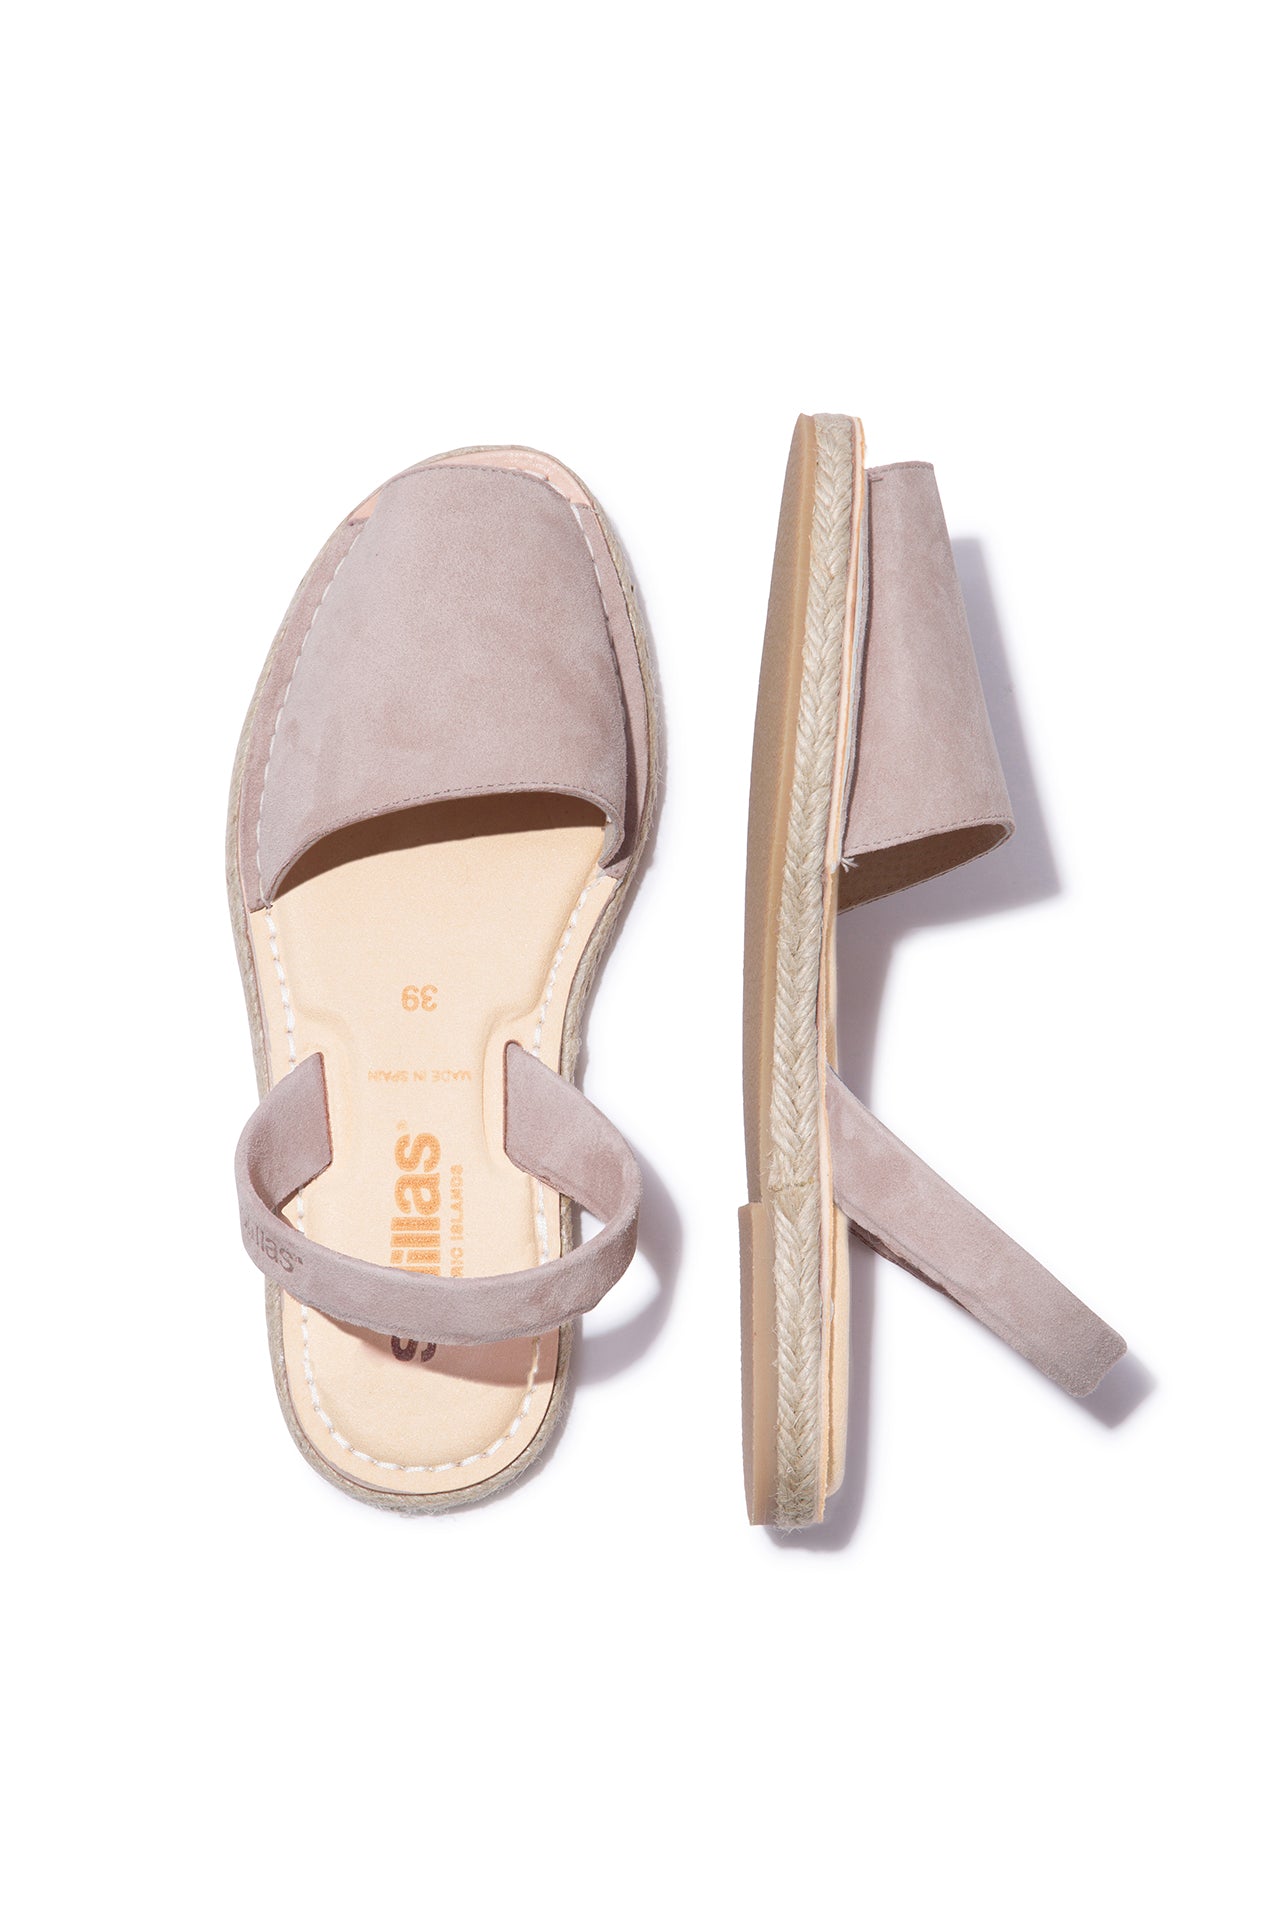 Pedra Mimoso - Espadrille Menorcan Sandals in Grey Leather with Padded Insole